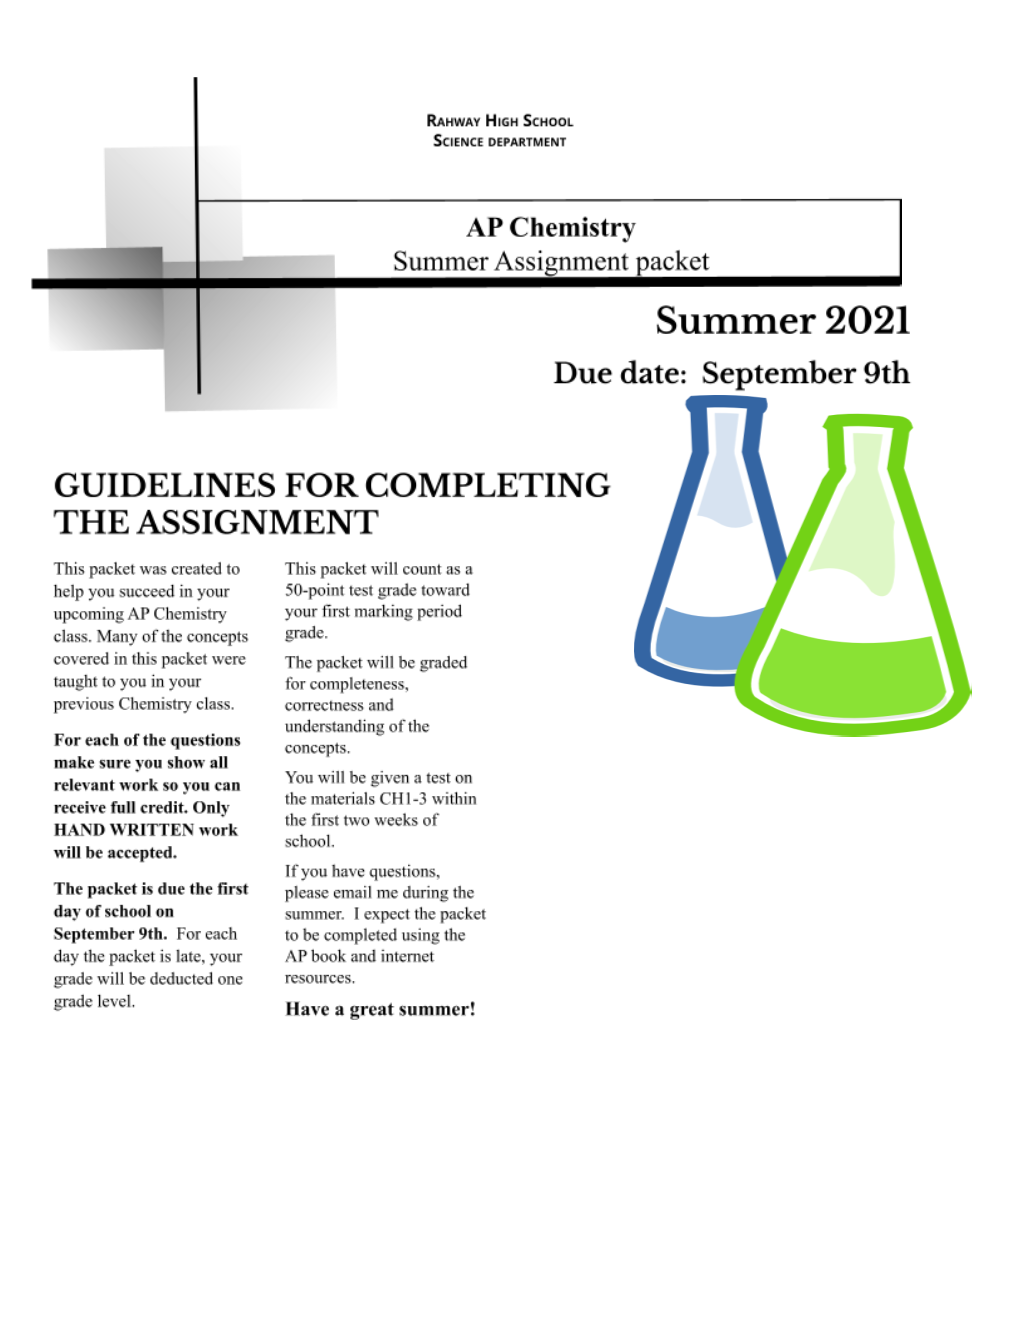 AP Chemistry Summer Assignment 2021-22 School Year